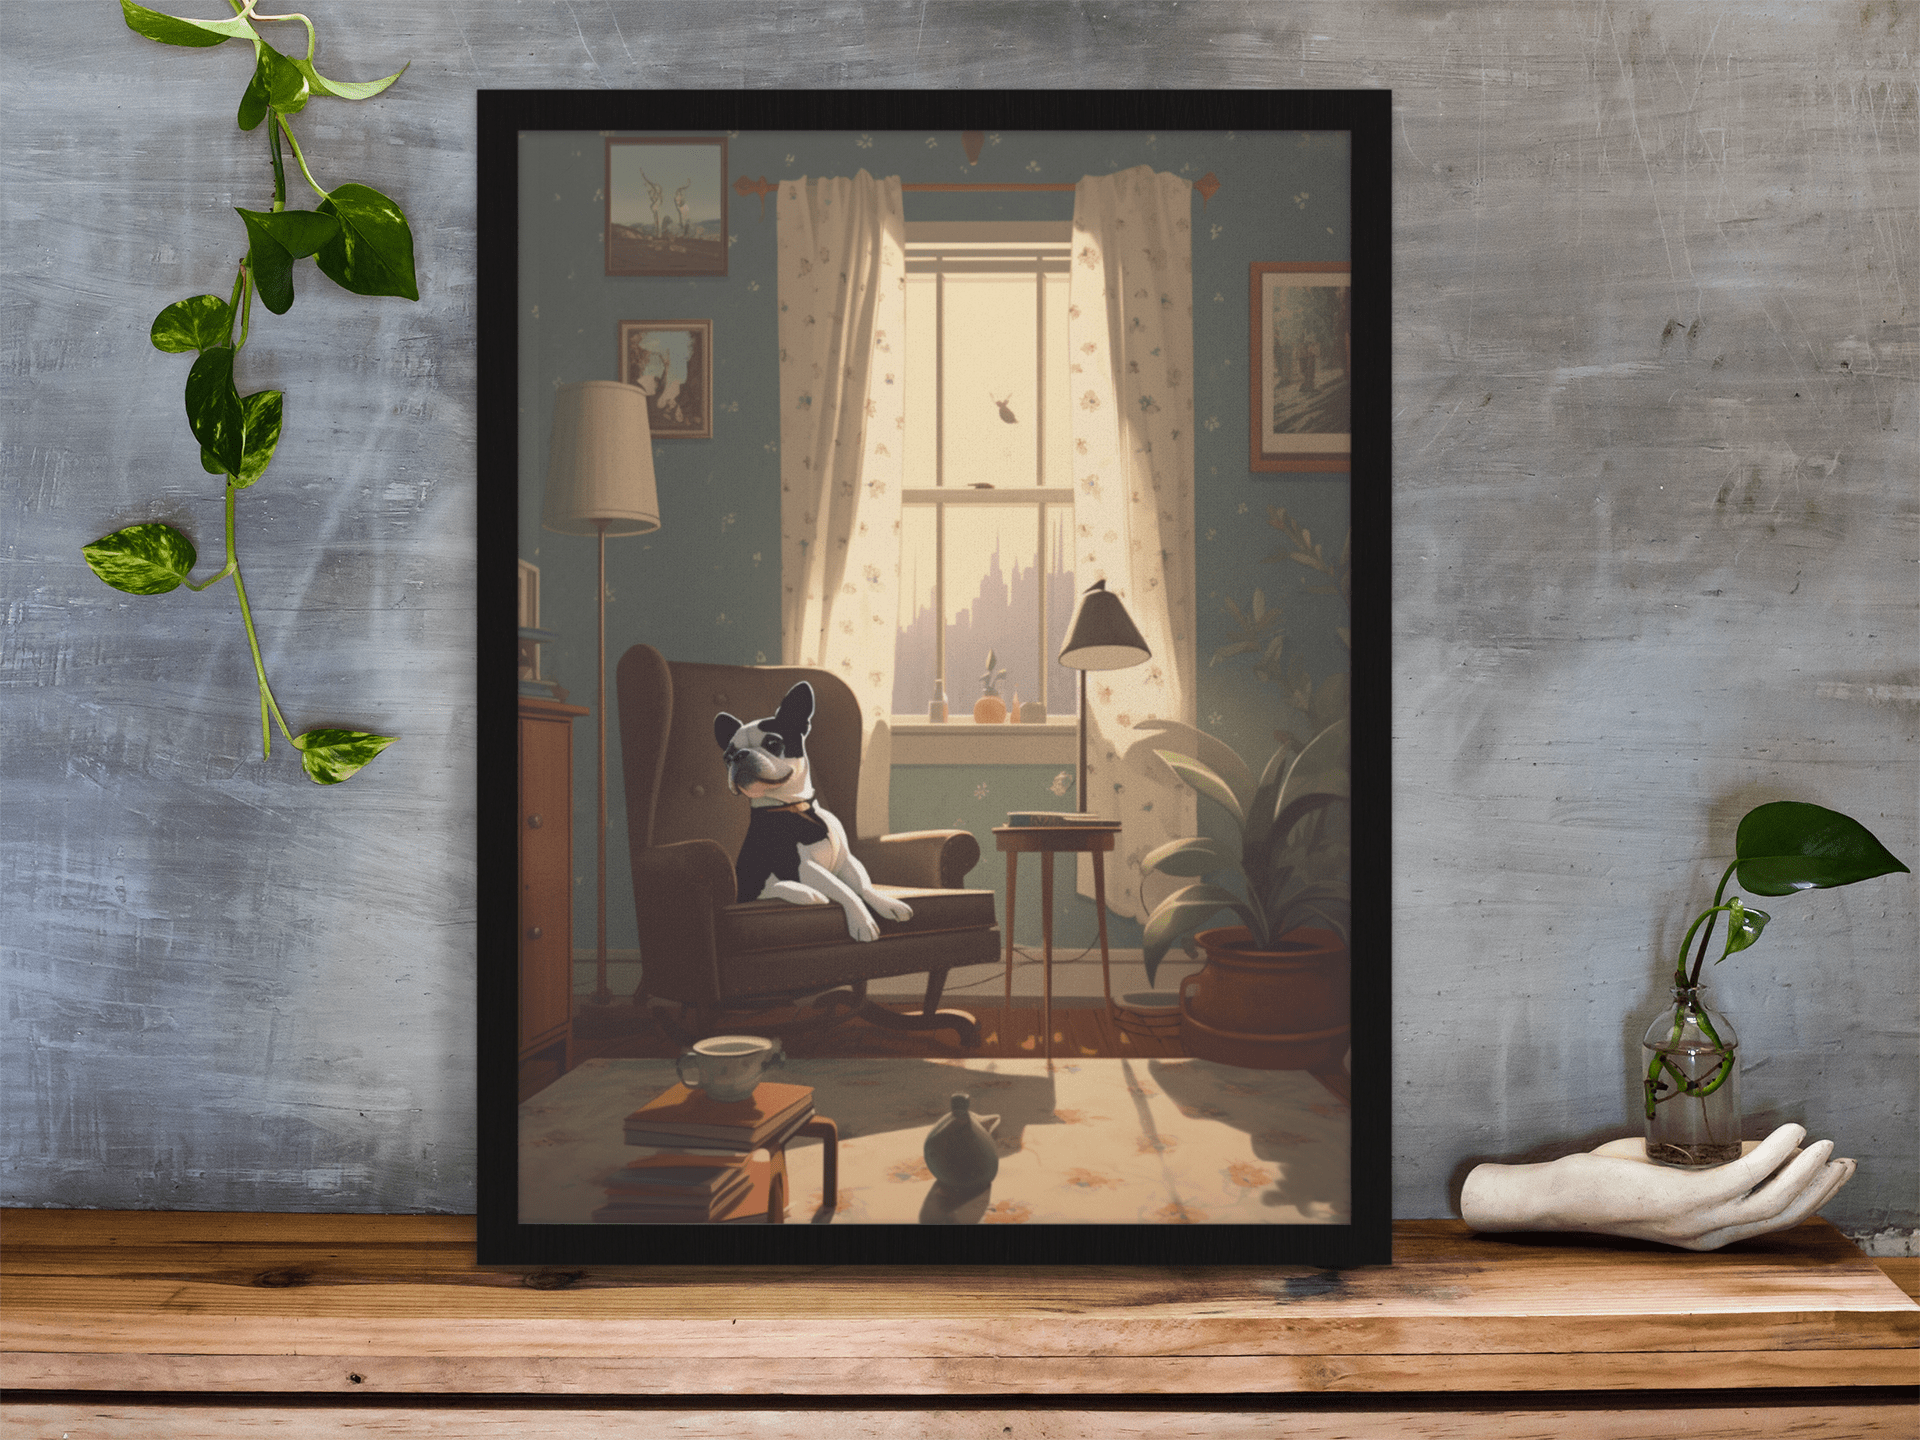 Image featuring a detailed character illustration of a Boston Terrier lounging on a white chair by an open window, this poster captures a cinematic atmosphere with its illustrated style.